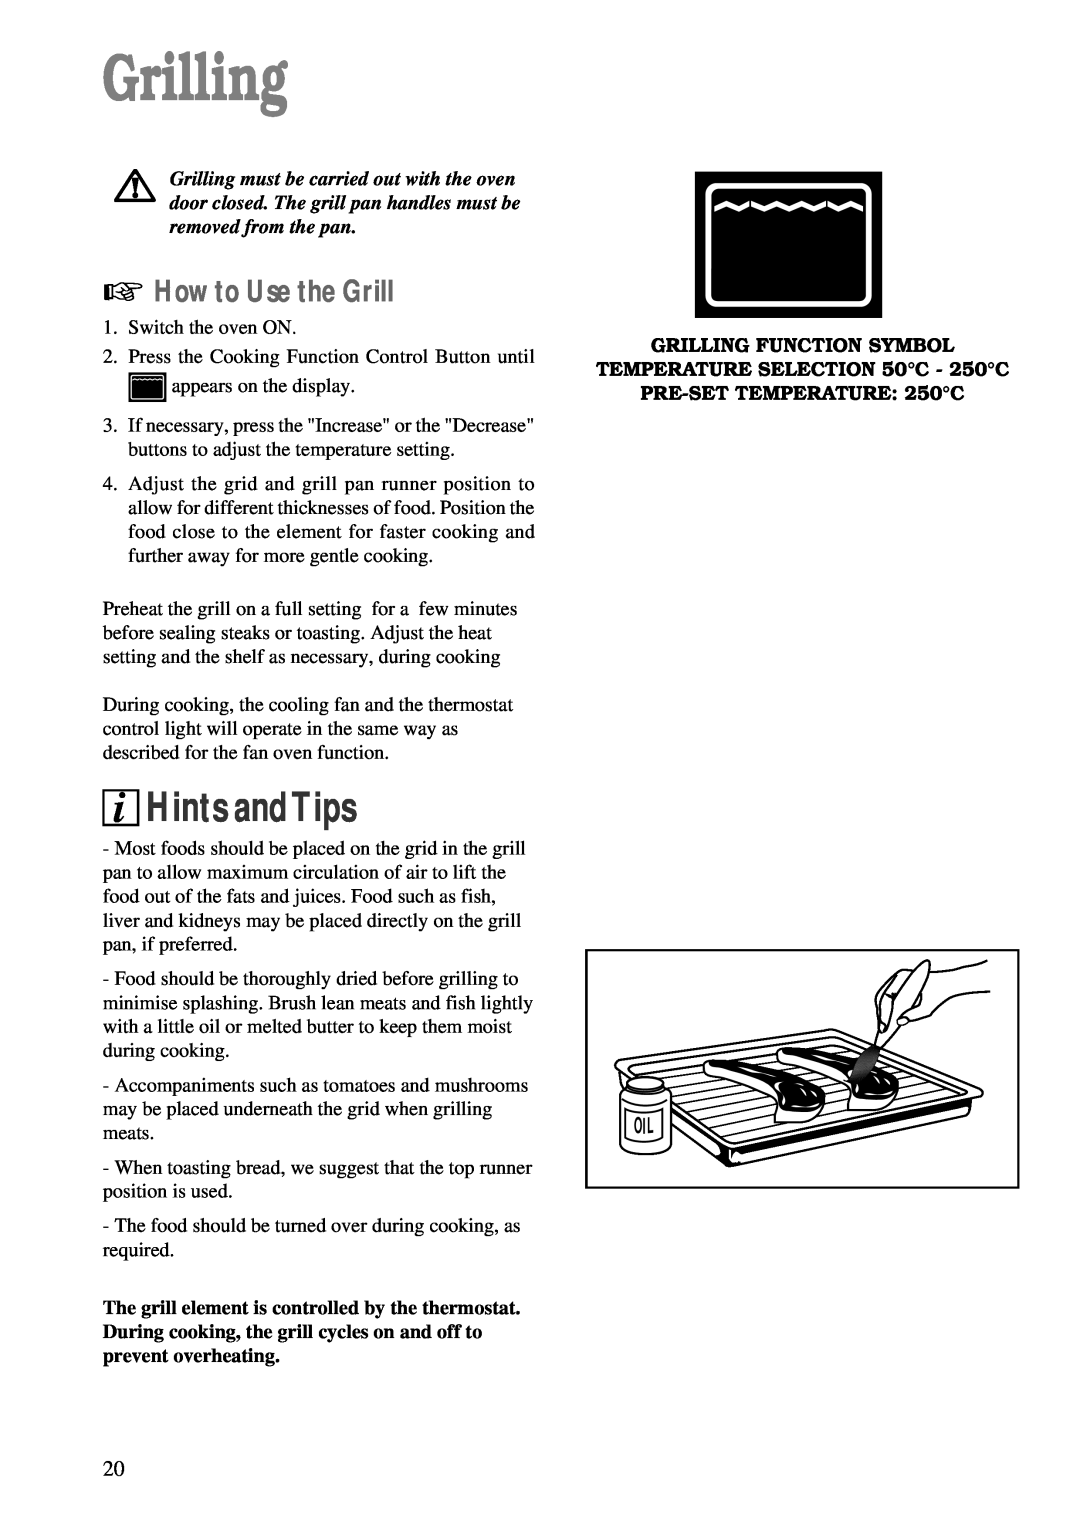 Zanussi ZBM 890 manual How to Use the Grill, iHints andTips, Grilling Function Symbol, TEMPERATURE SELECTION 50C - 250C 